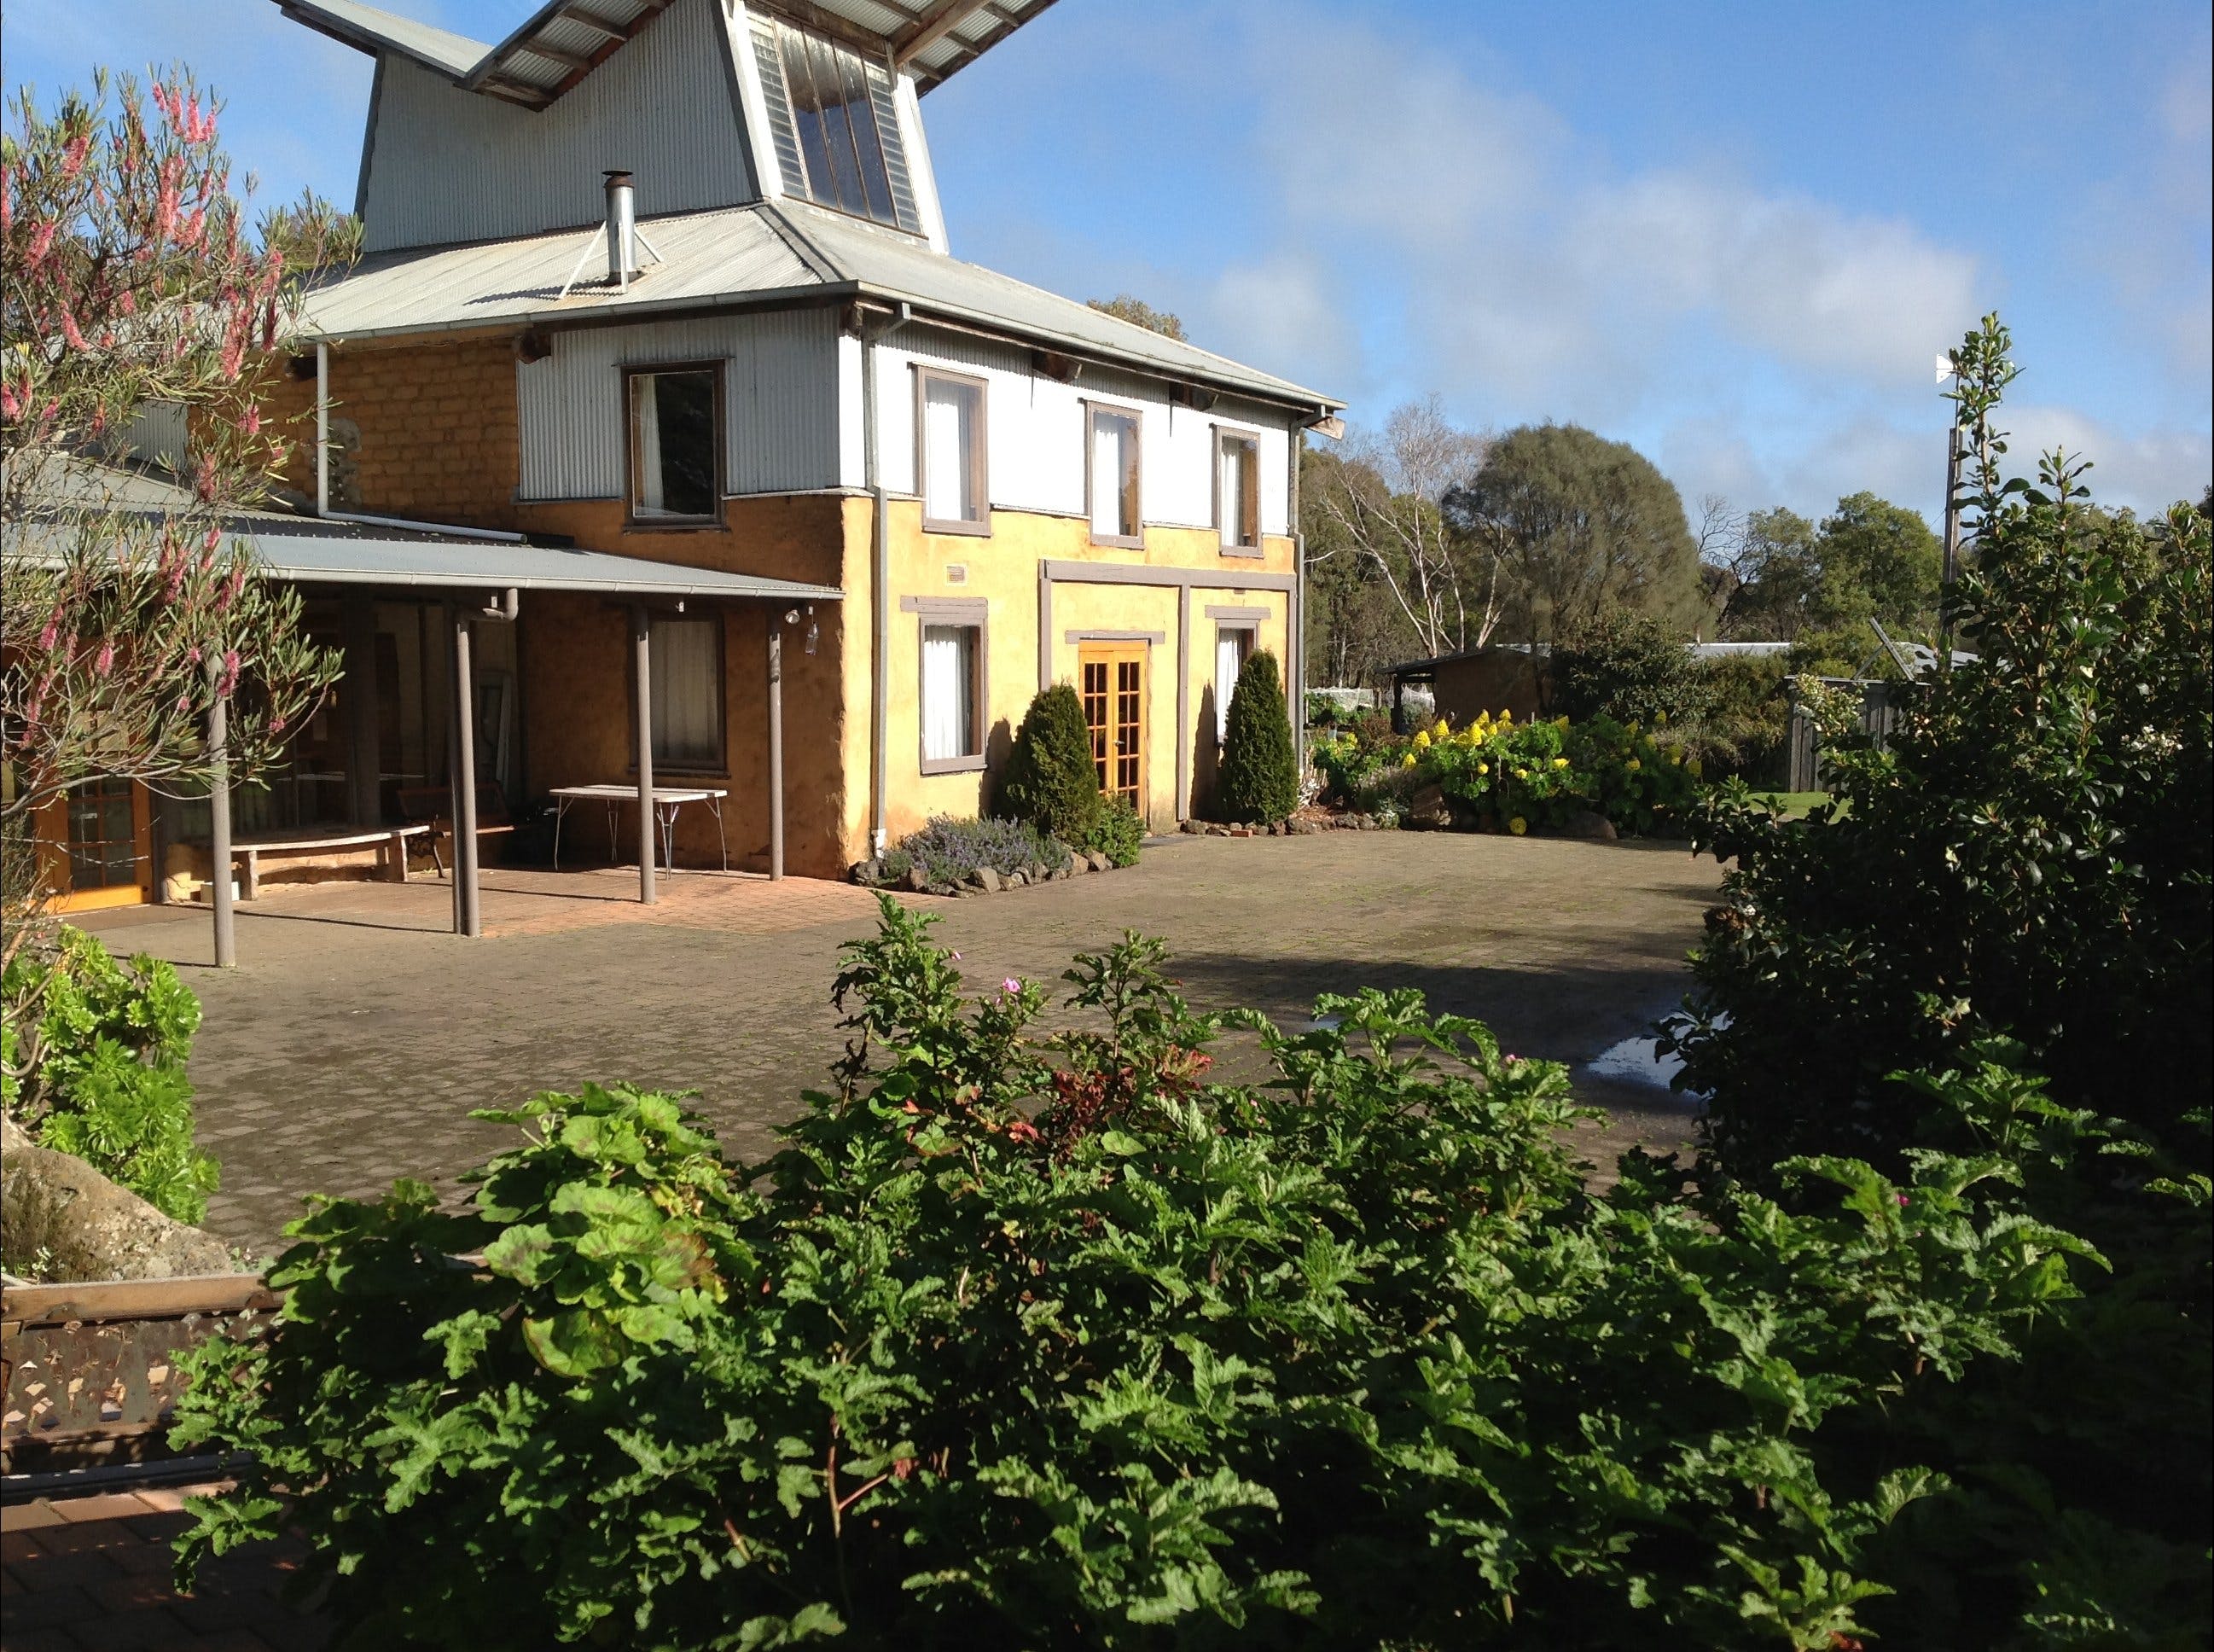 HIRL Hamilton Institute of Rural Learning - WA Accommodation